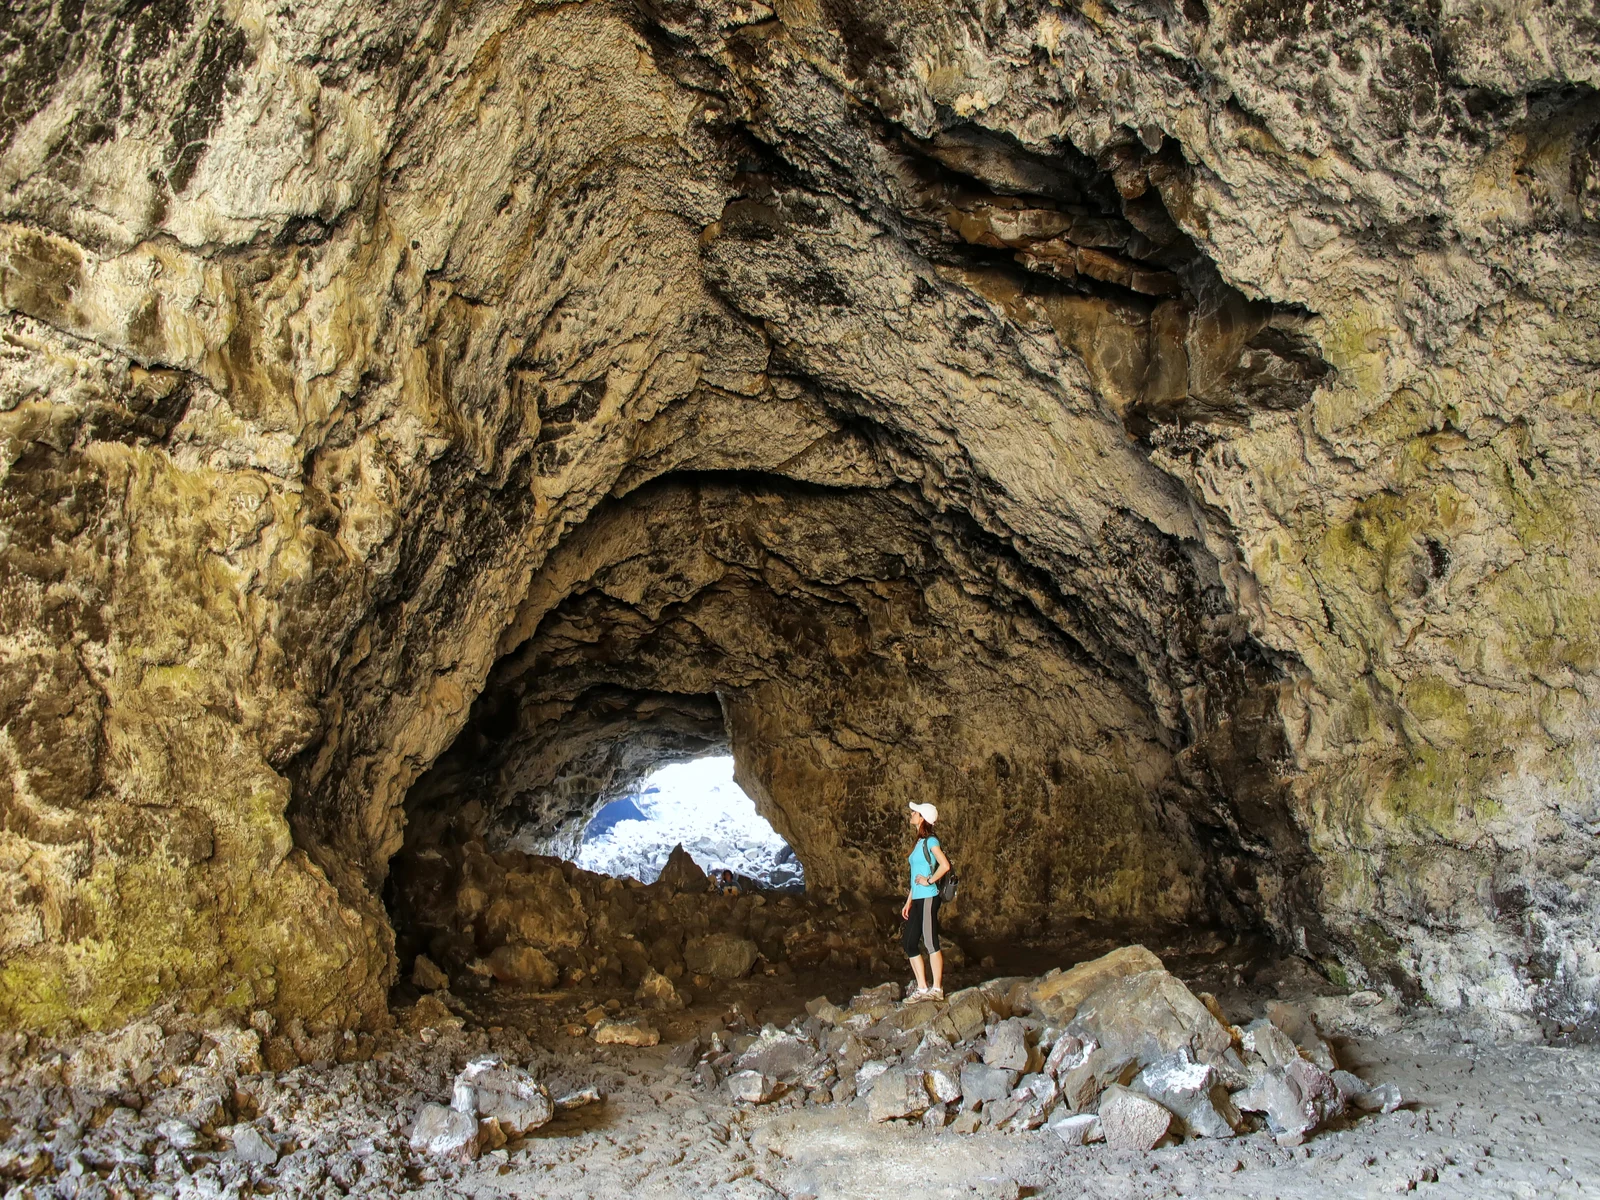 Indian Tunnel Cave in Craters of the Moon Park, one of the best things to see in Idaho